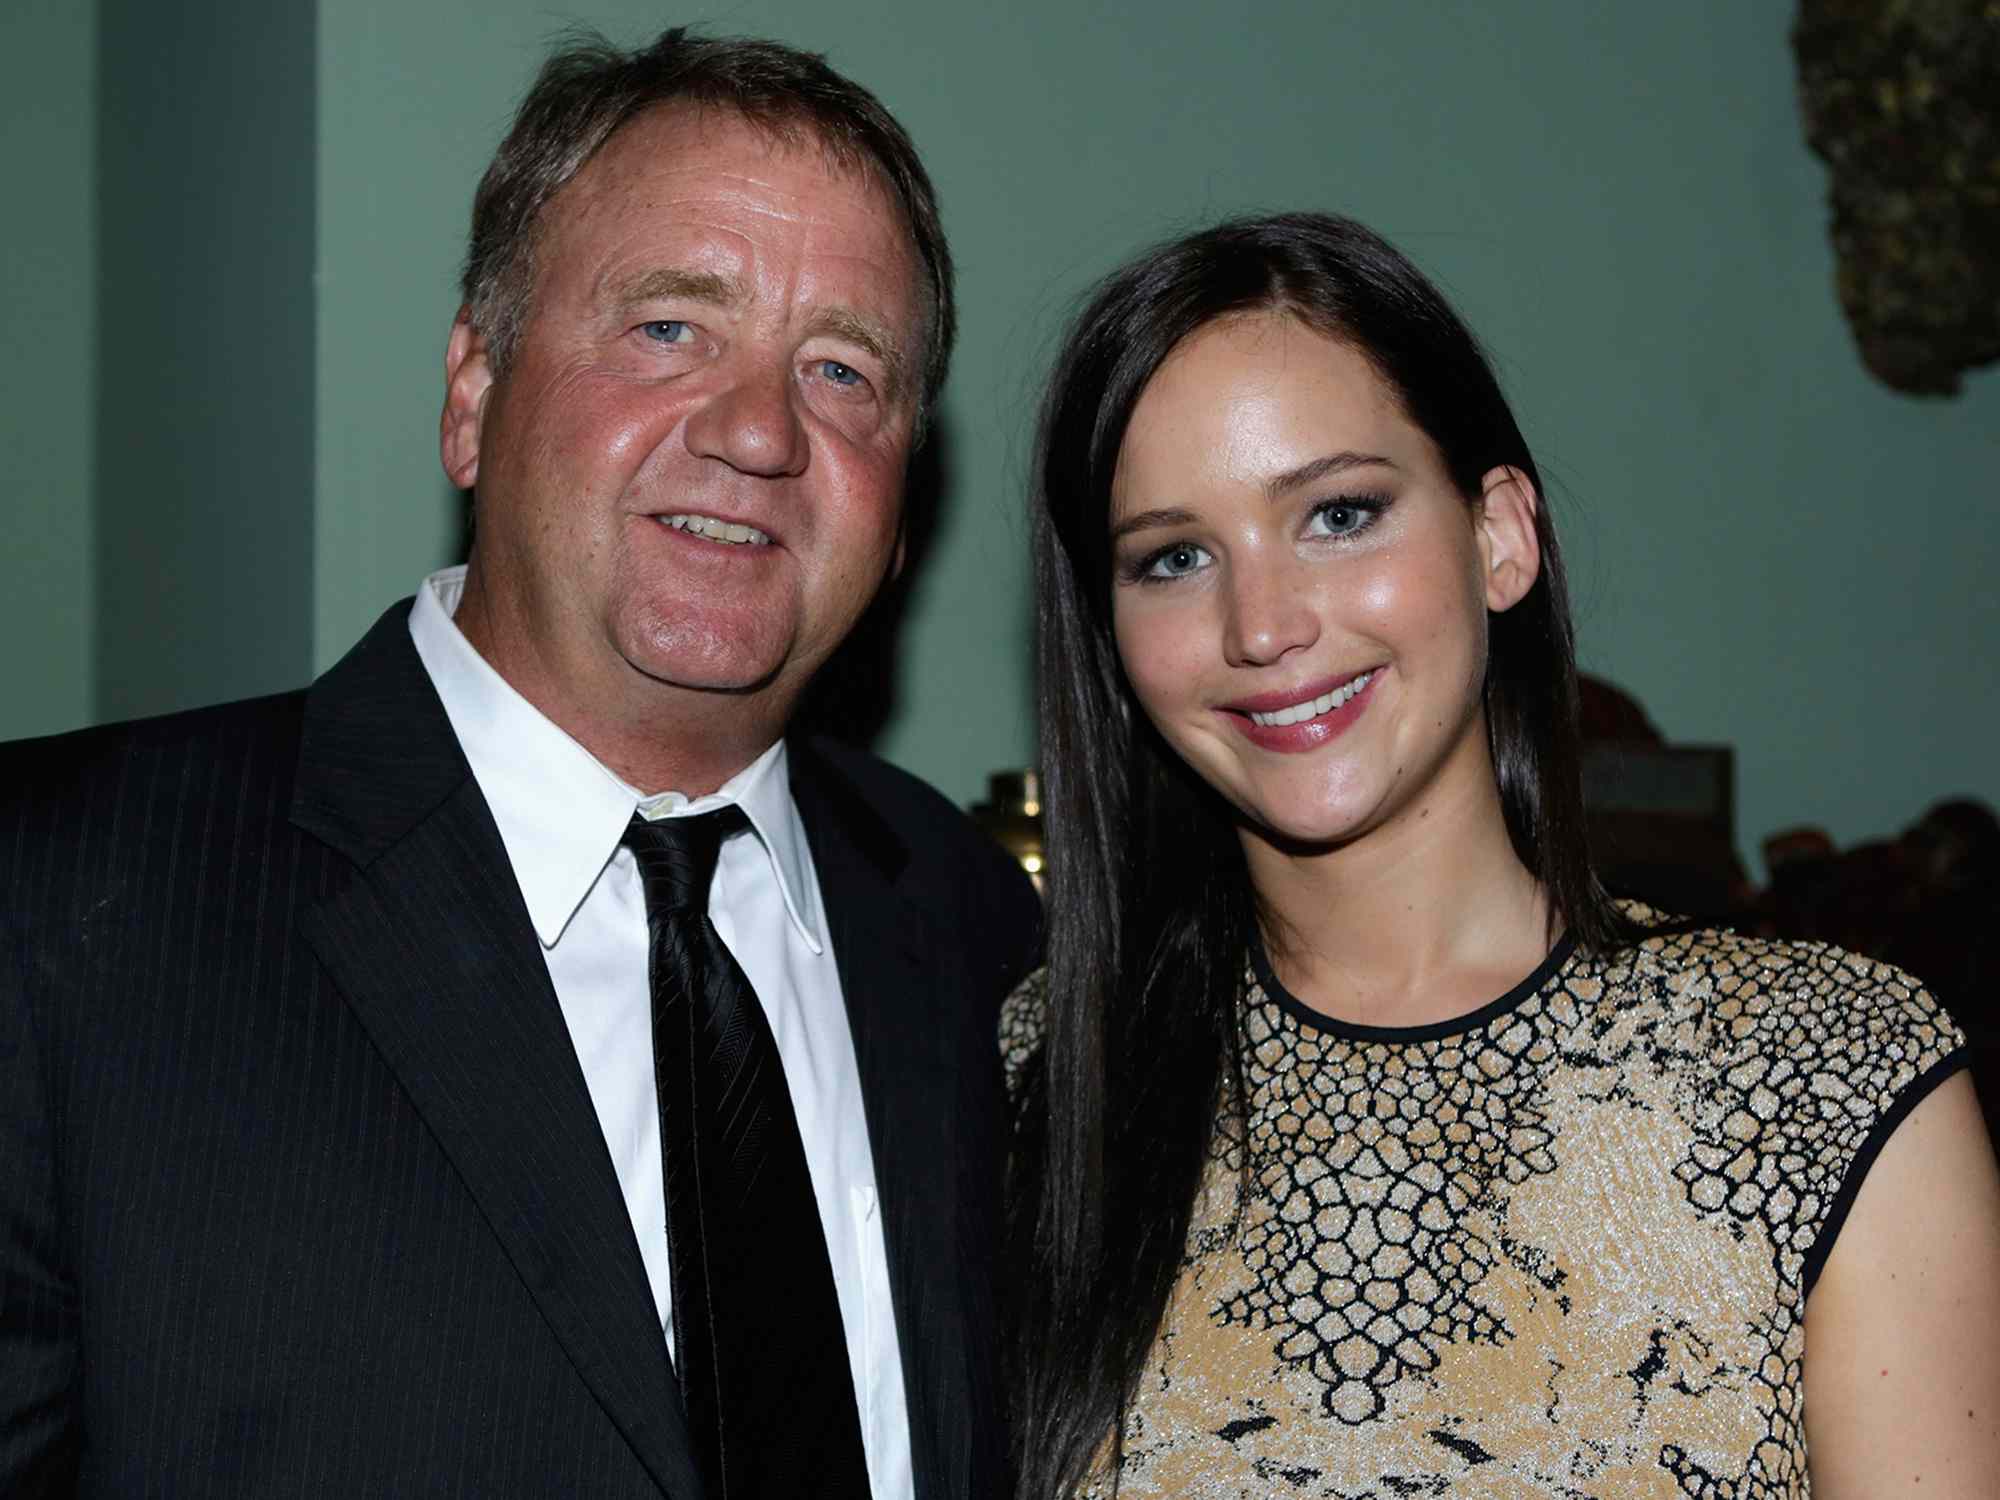 Gary Lawrence and Jennifer Lawrence attend The Weinstein Company film premiere party for 'Silver Linings Playbook' in 2012.